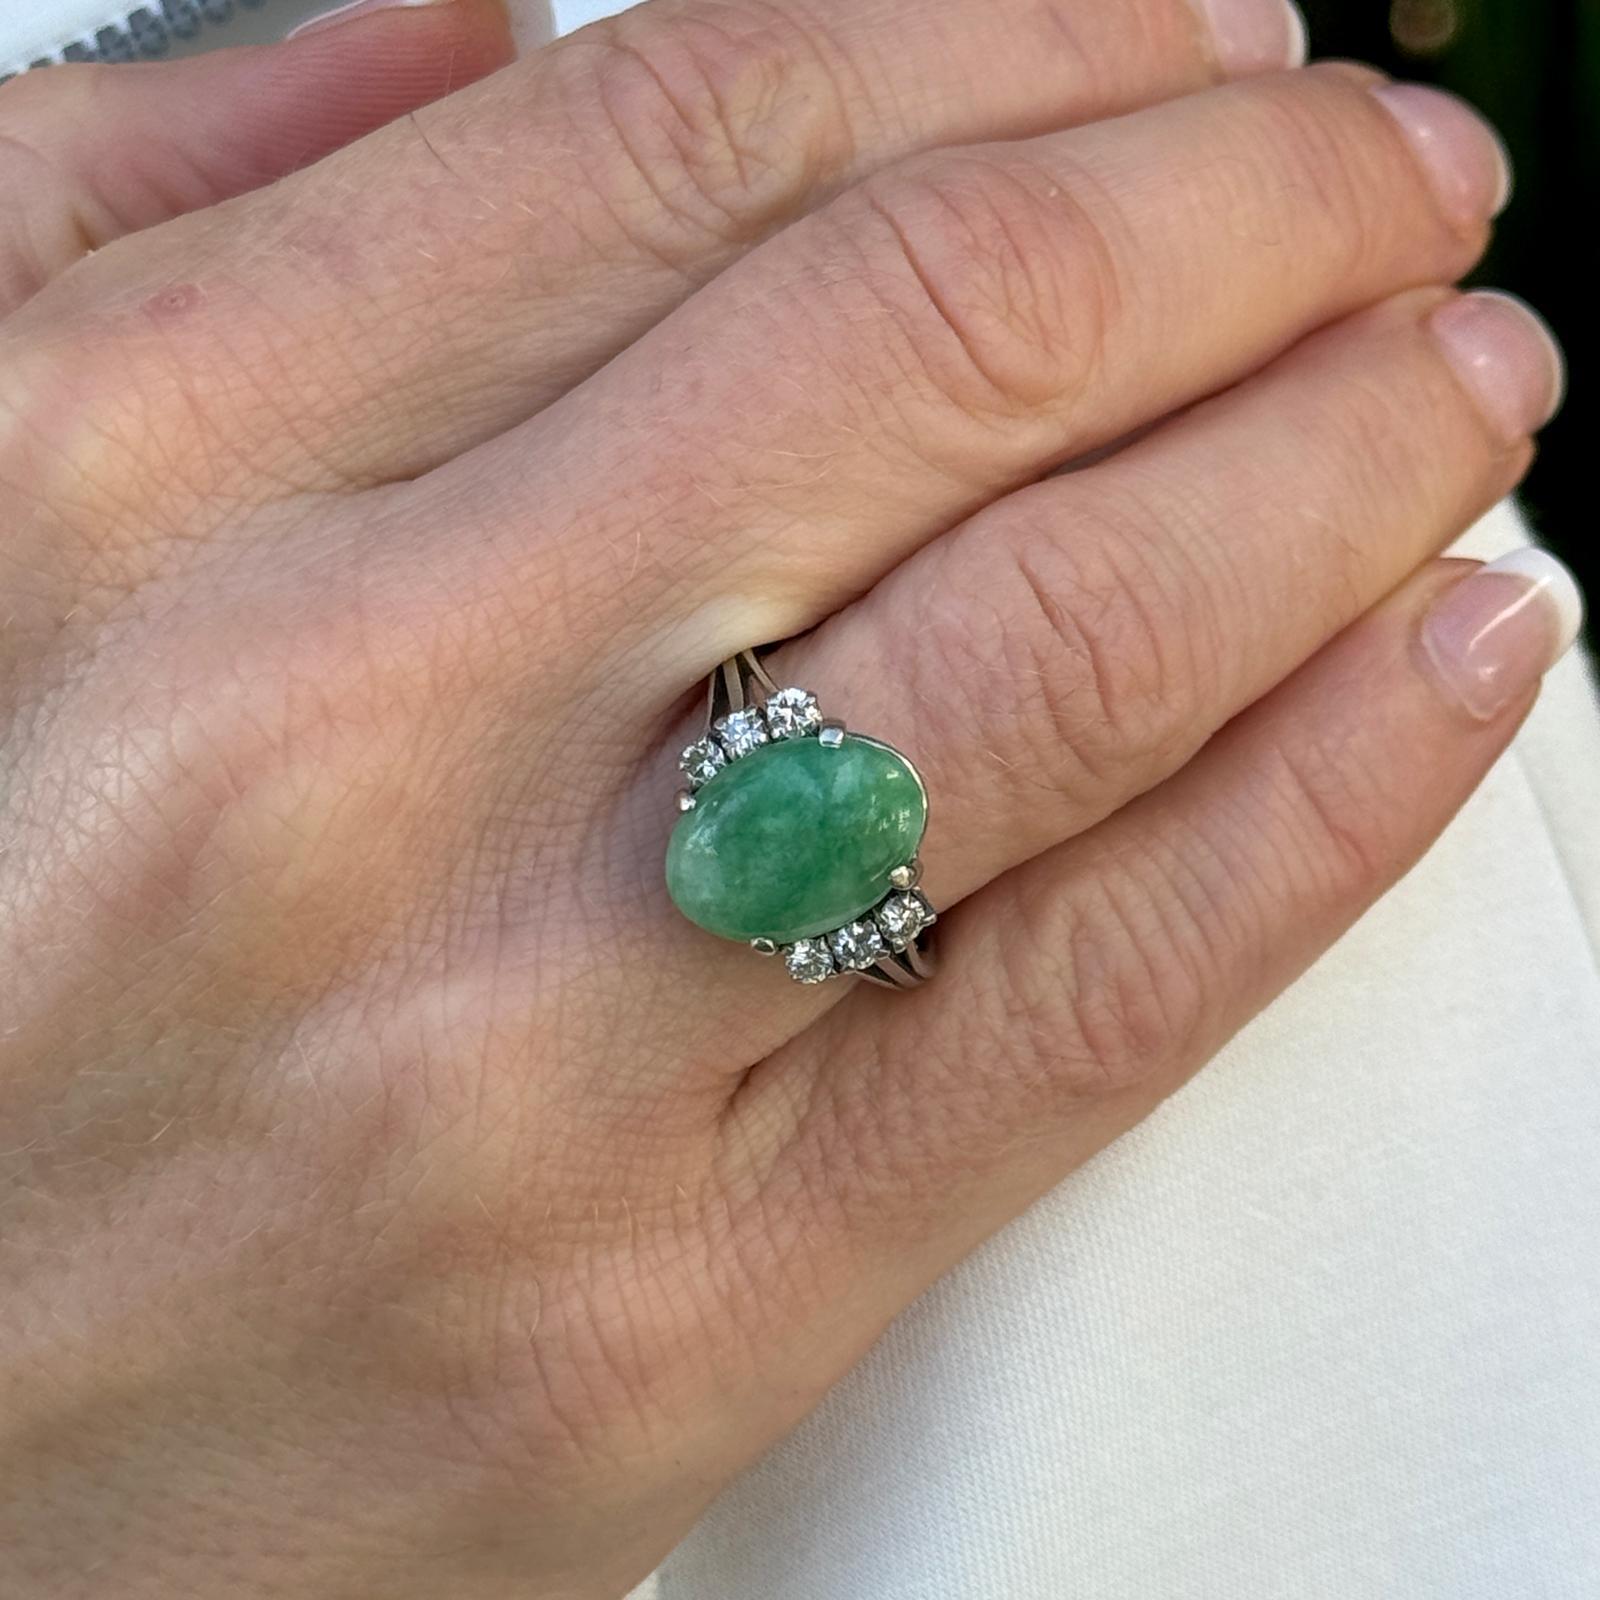 Green jade and diamond cocktail ring crafted in 18 karat white gold. The ring features a cabochon oval green jade gemstone flanked by 6 round briliant cut diamonds weighing approximately .33 carat total weight. The diamonds are graded G-H color and